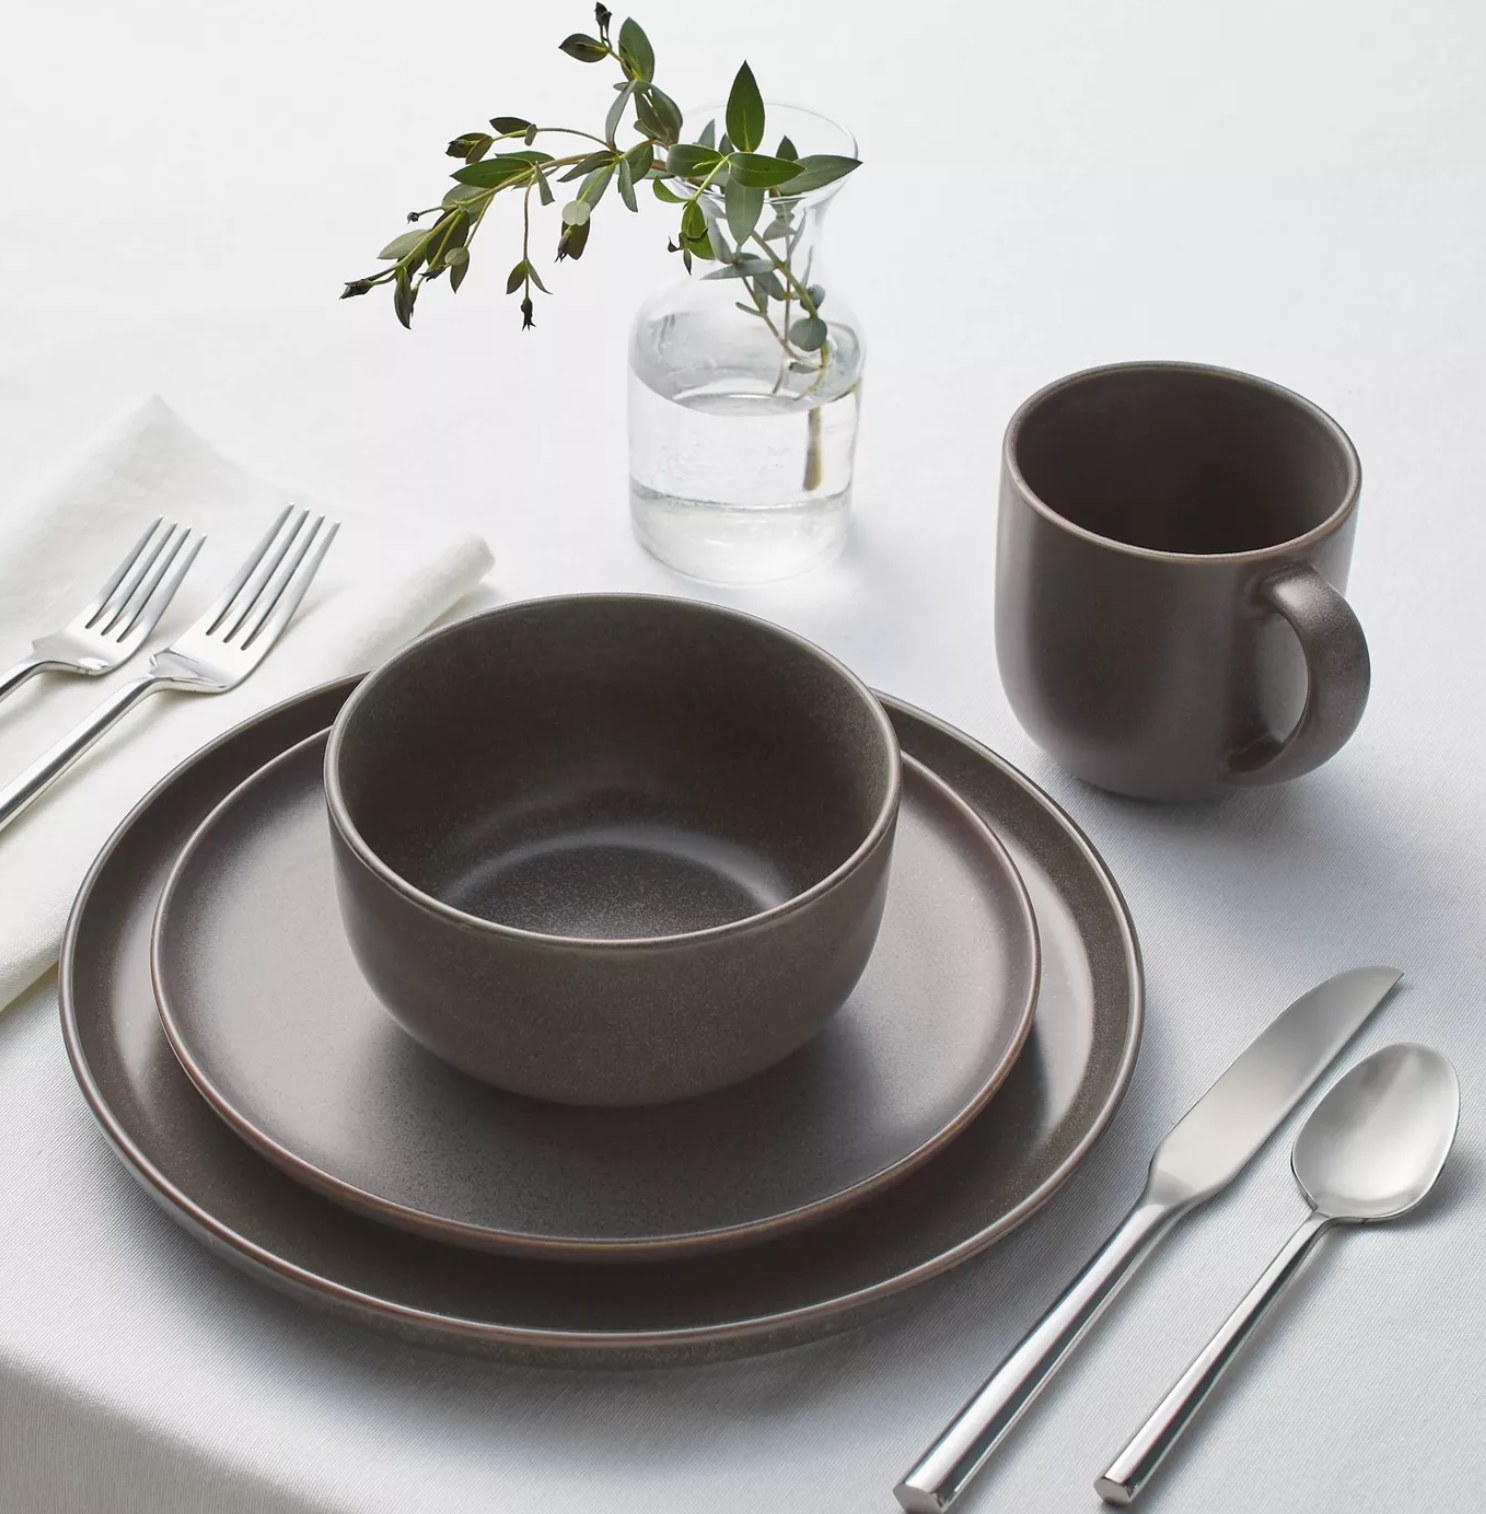 a dinner plate, salad plate, bowl, and mug from the set